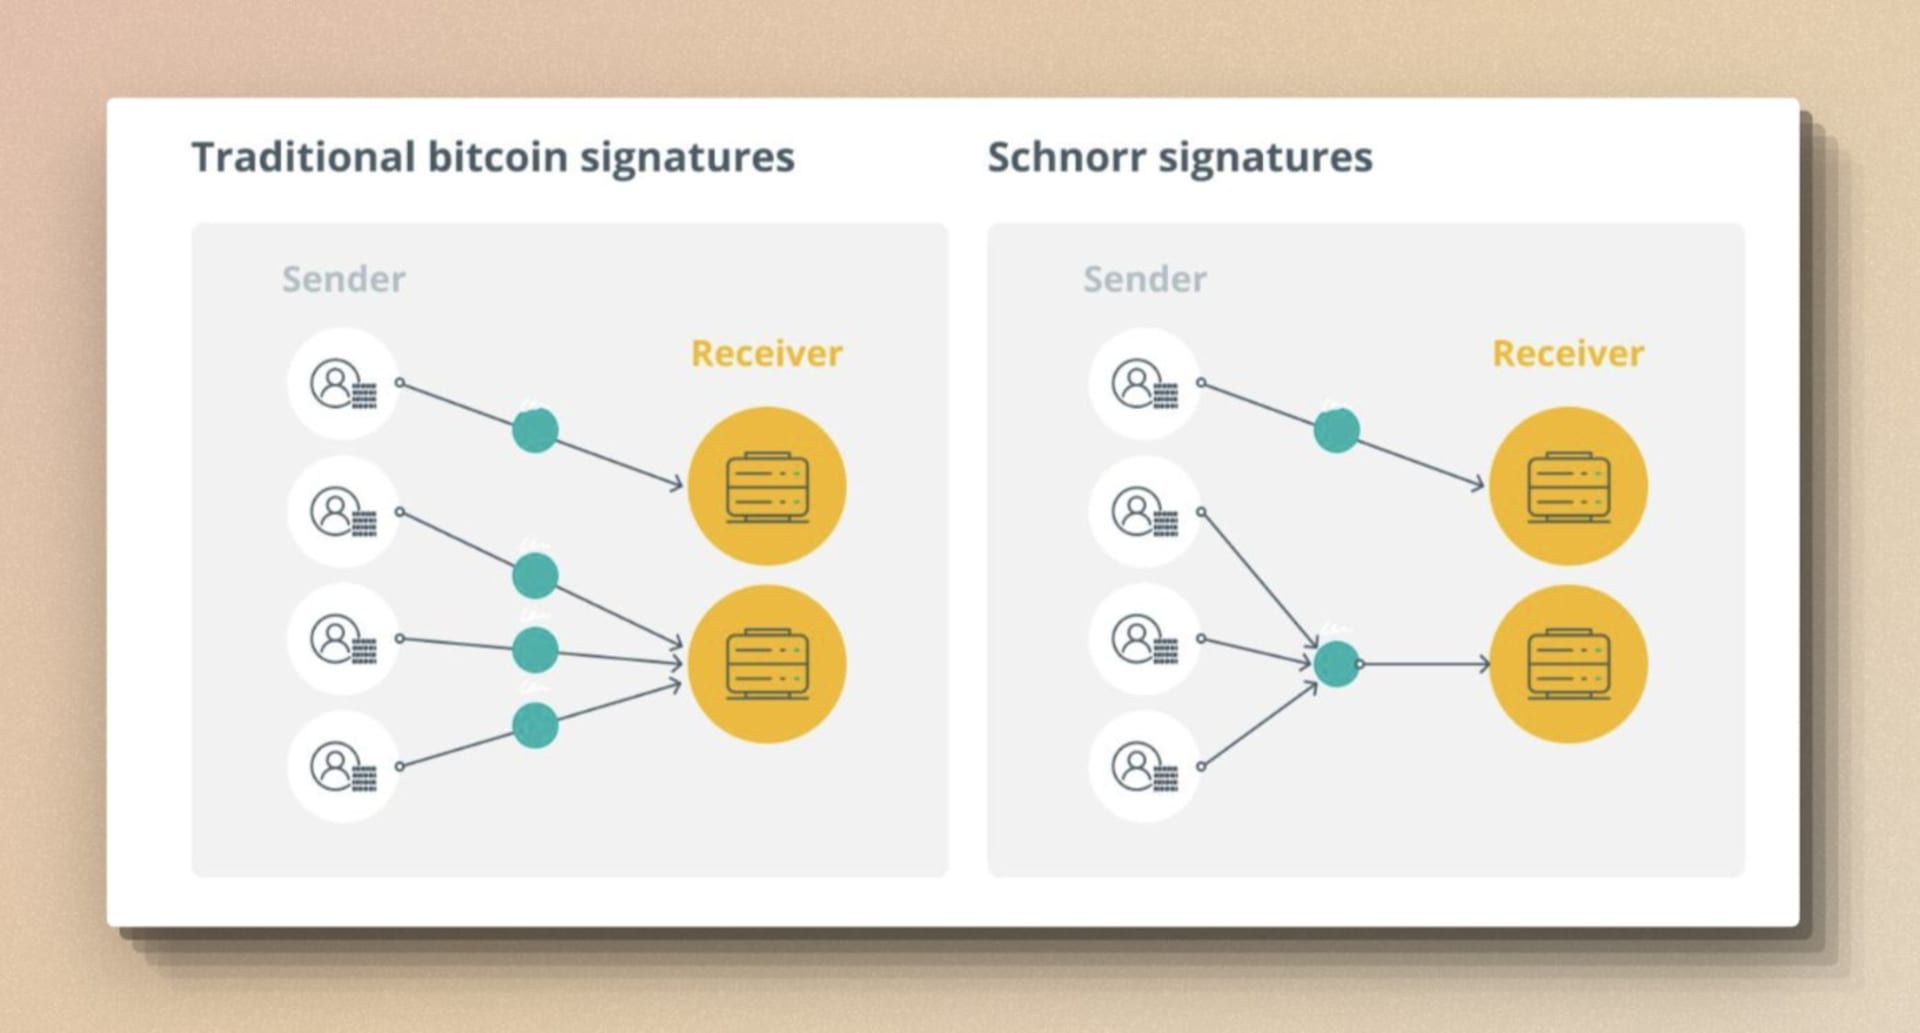 Traditional bitcoin signatures and schnorr signatures